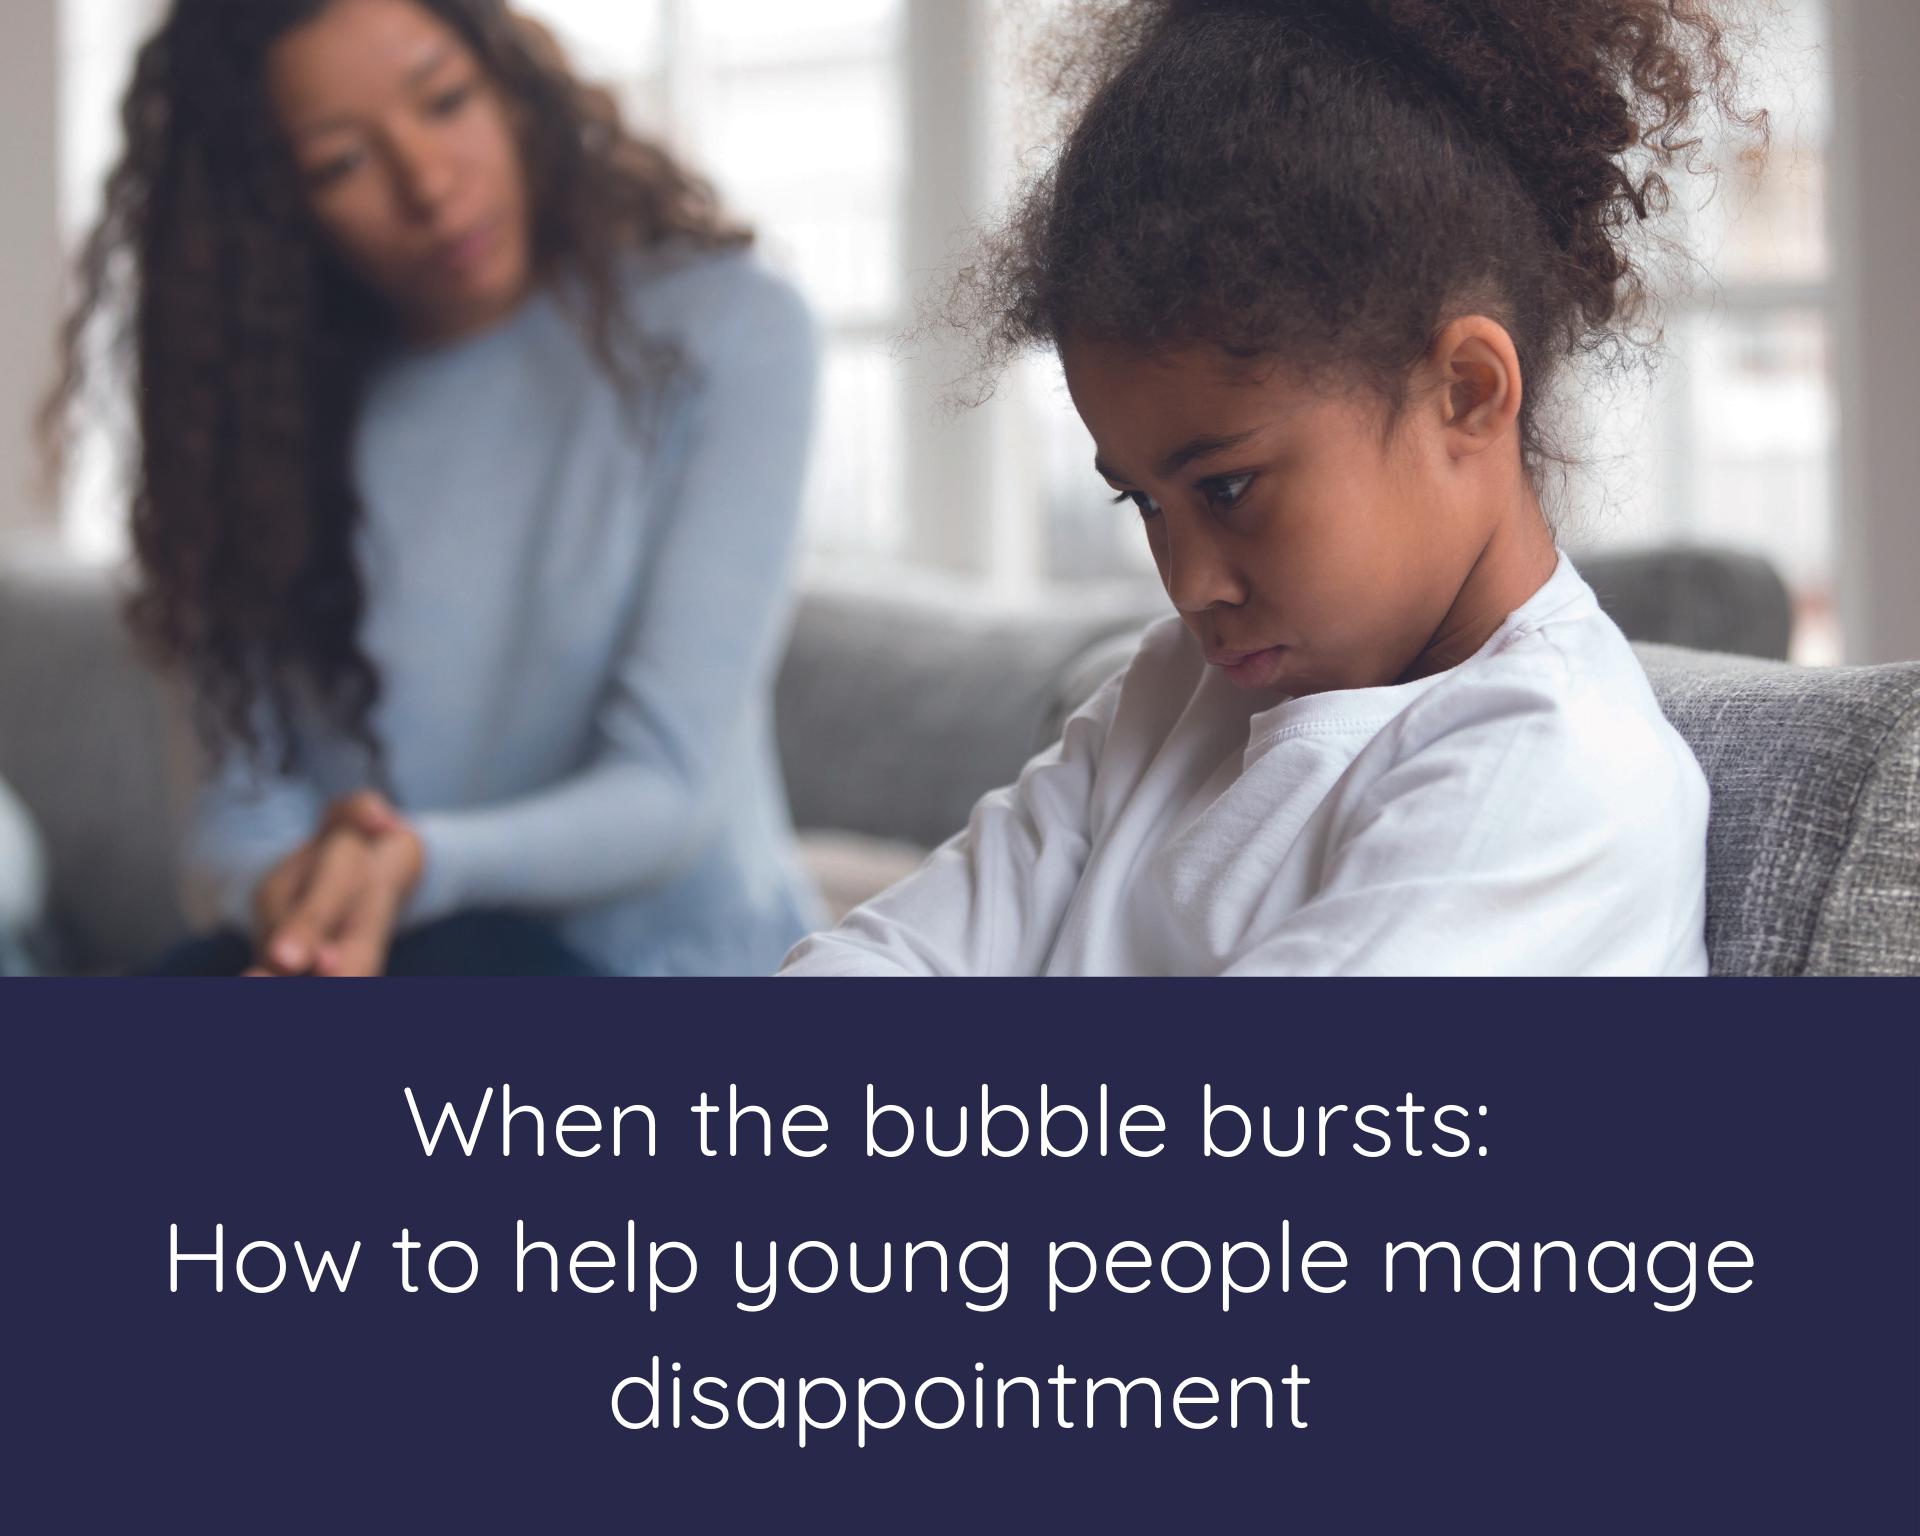 When the bubble bursts: How to help young people manage disappointment